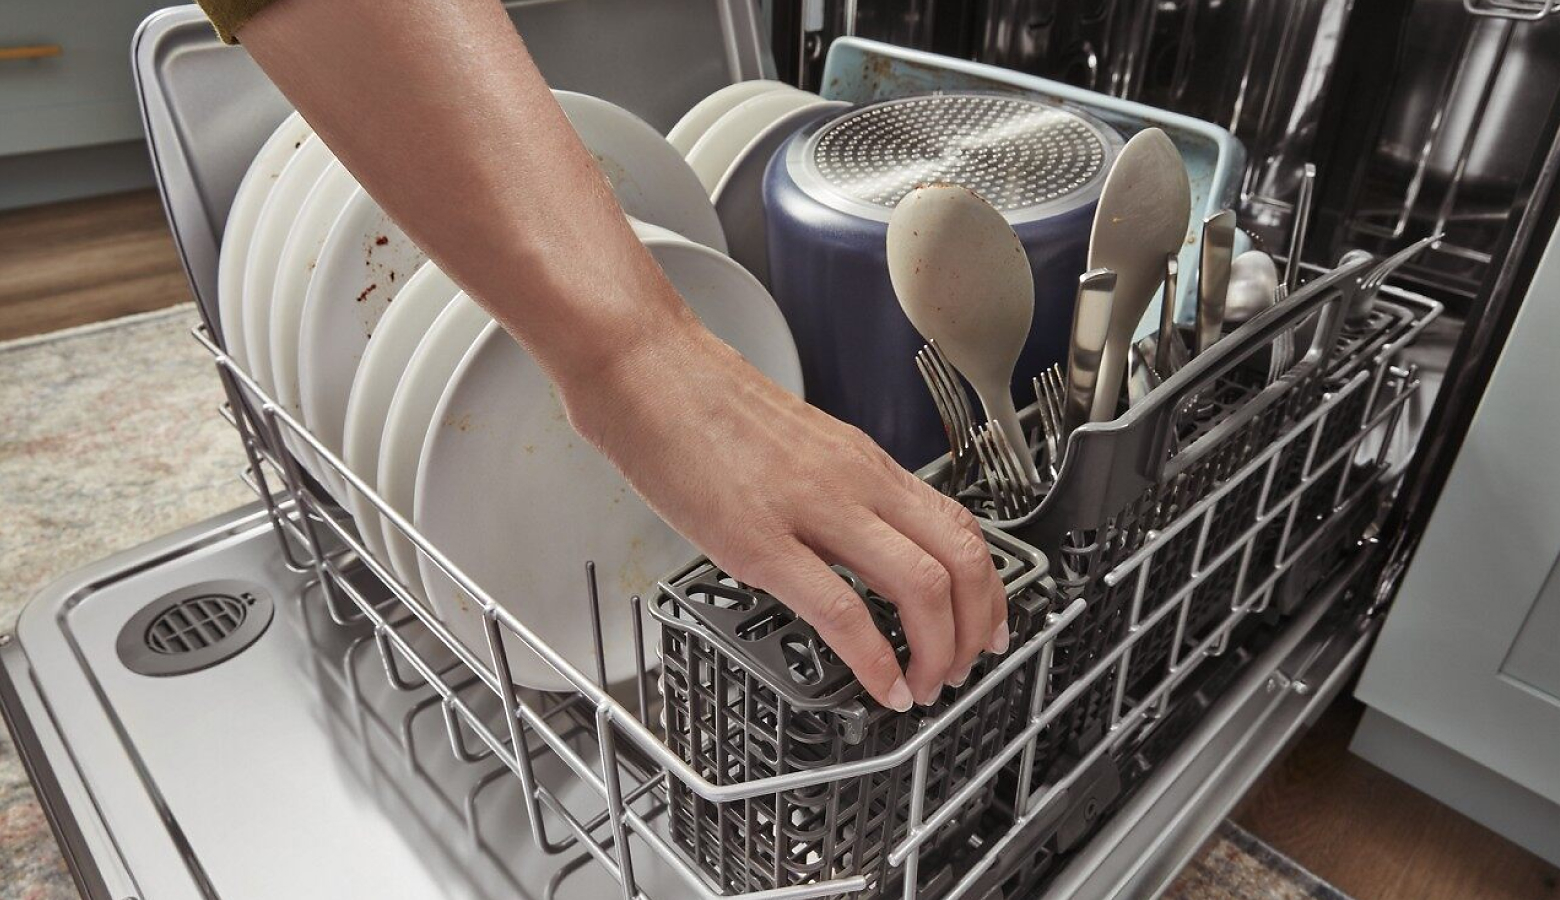 Hand reaching into a loaded dishwasher